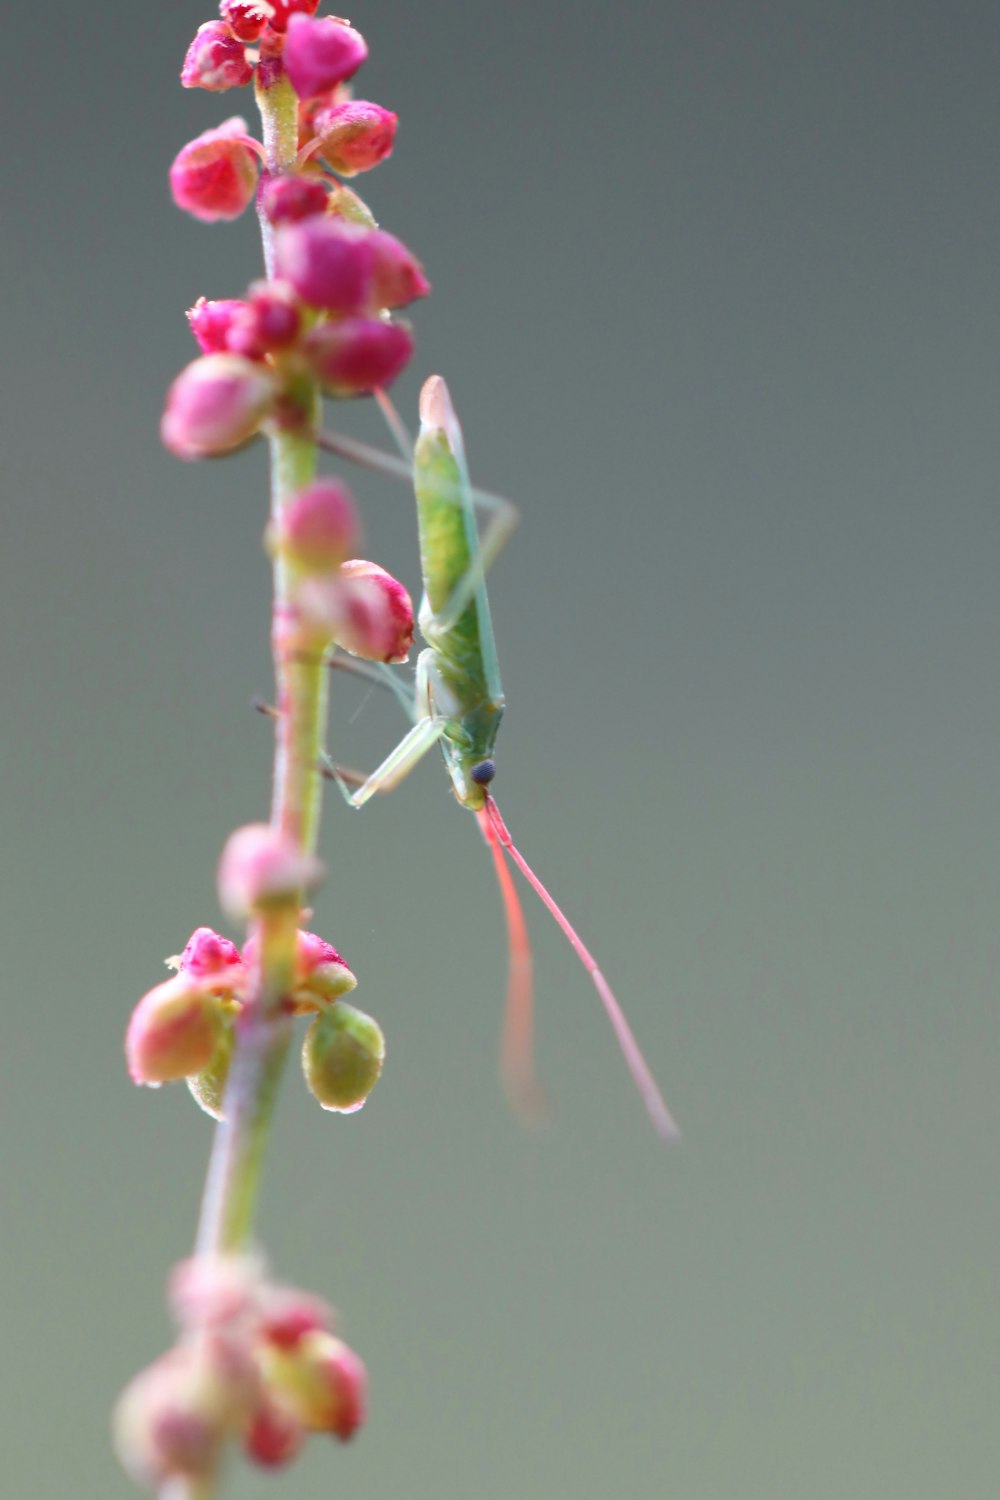 a green insect sitting on top of a pink flower